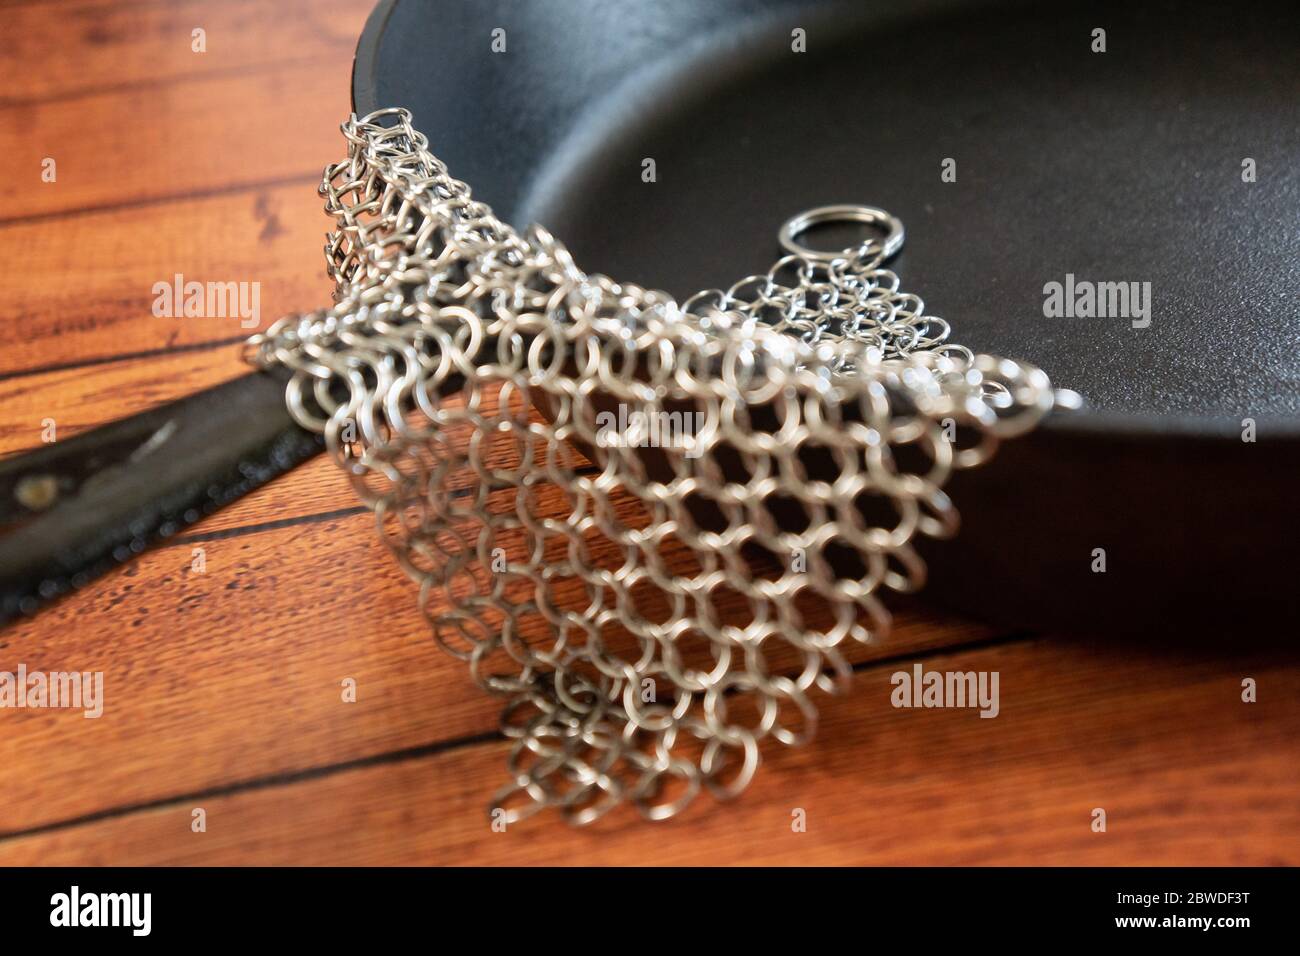 https://c8.alamy.com/comp/2BWDF3T/small-ring-chainmail-scrubber-for-cast-iron-stainless-steel-hard-anodized-cookware-and-other-pots-pans-for-for-cast-iron-cookware-dutch-ovens-2BWDF3T.jpg